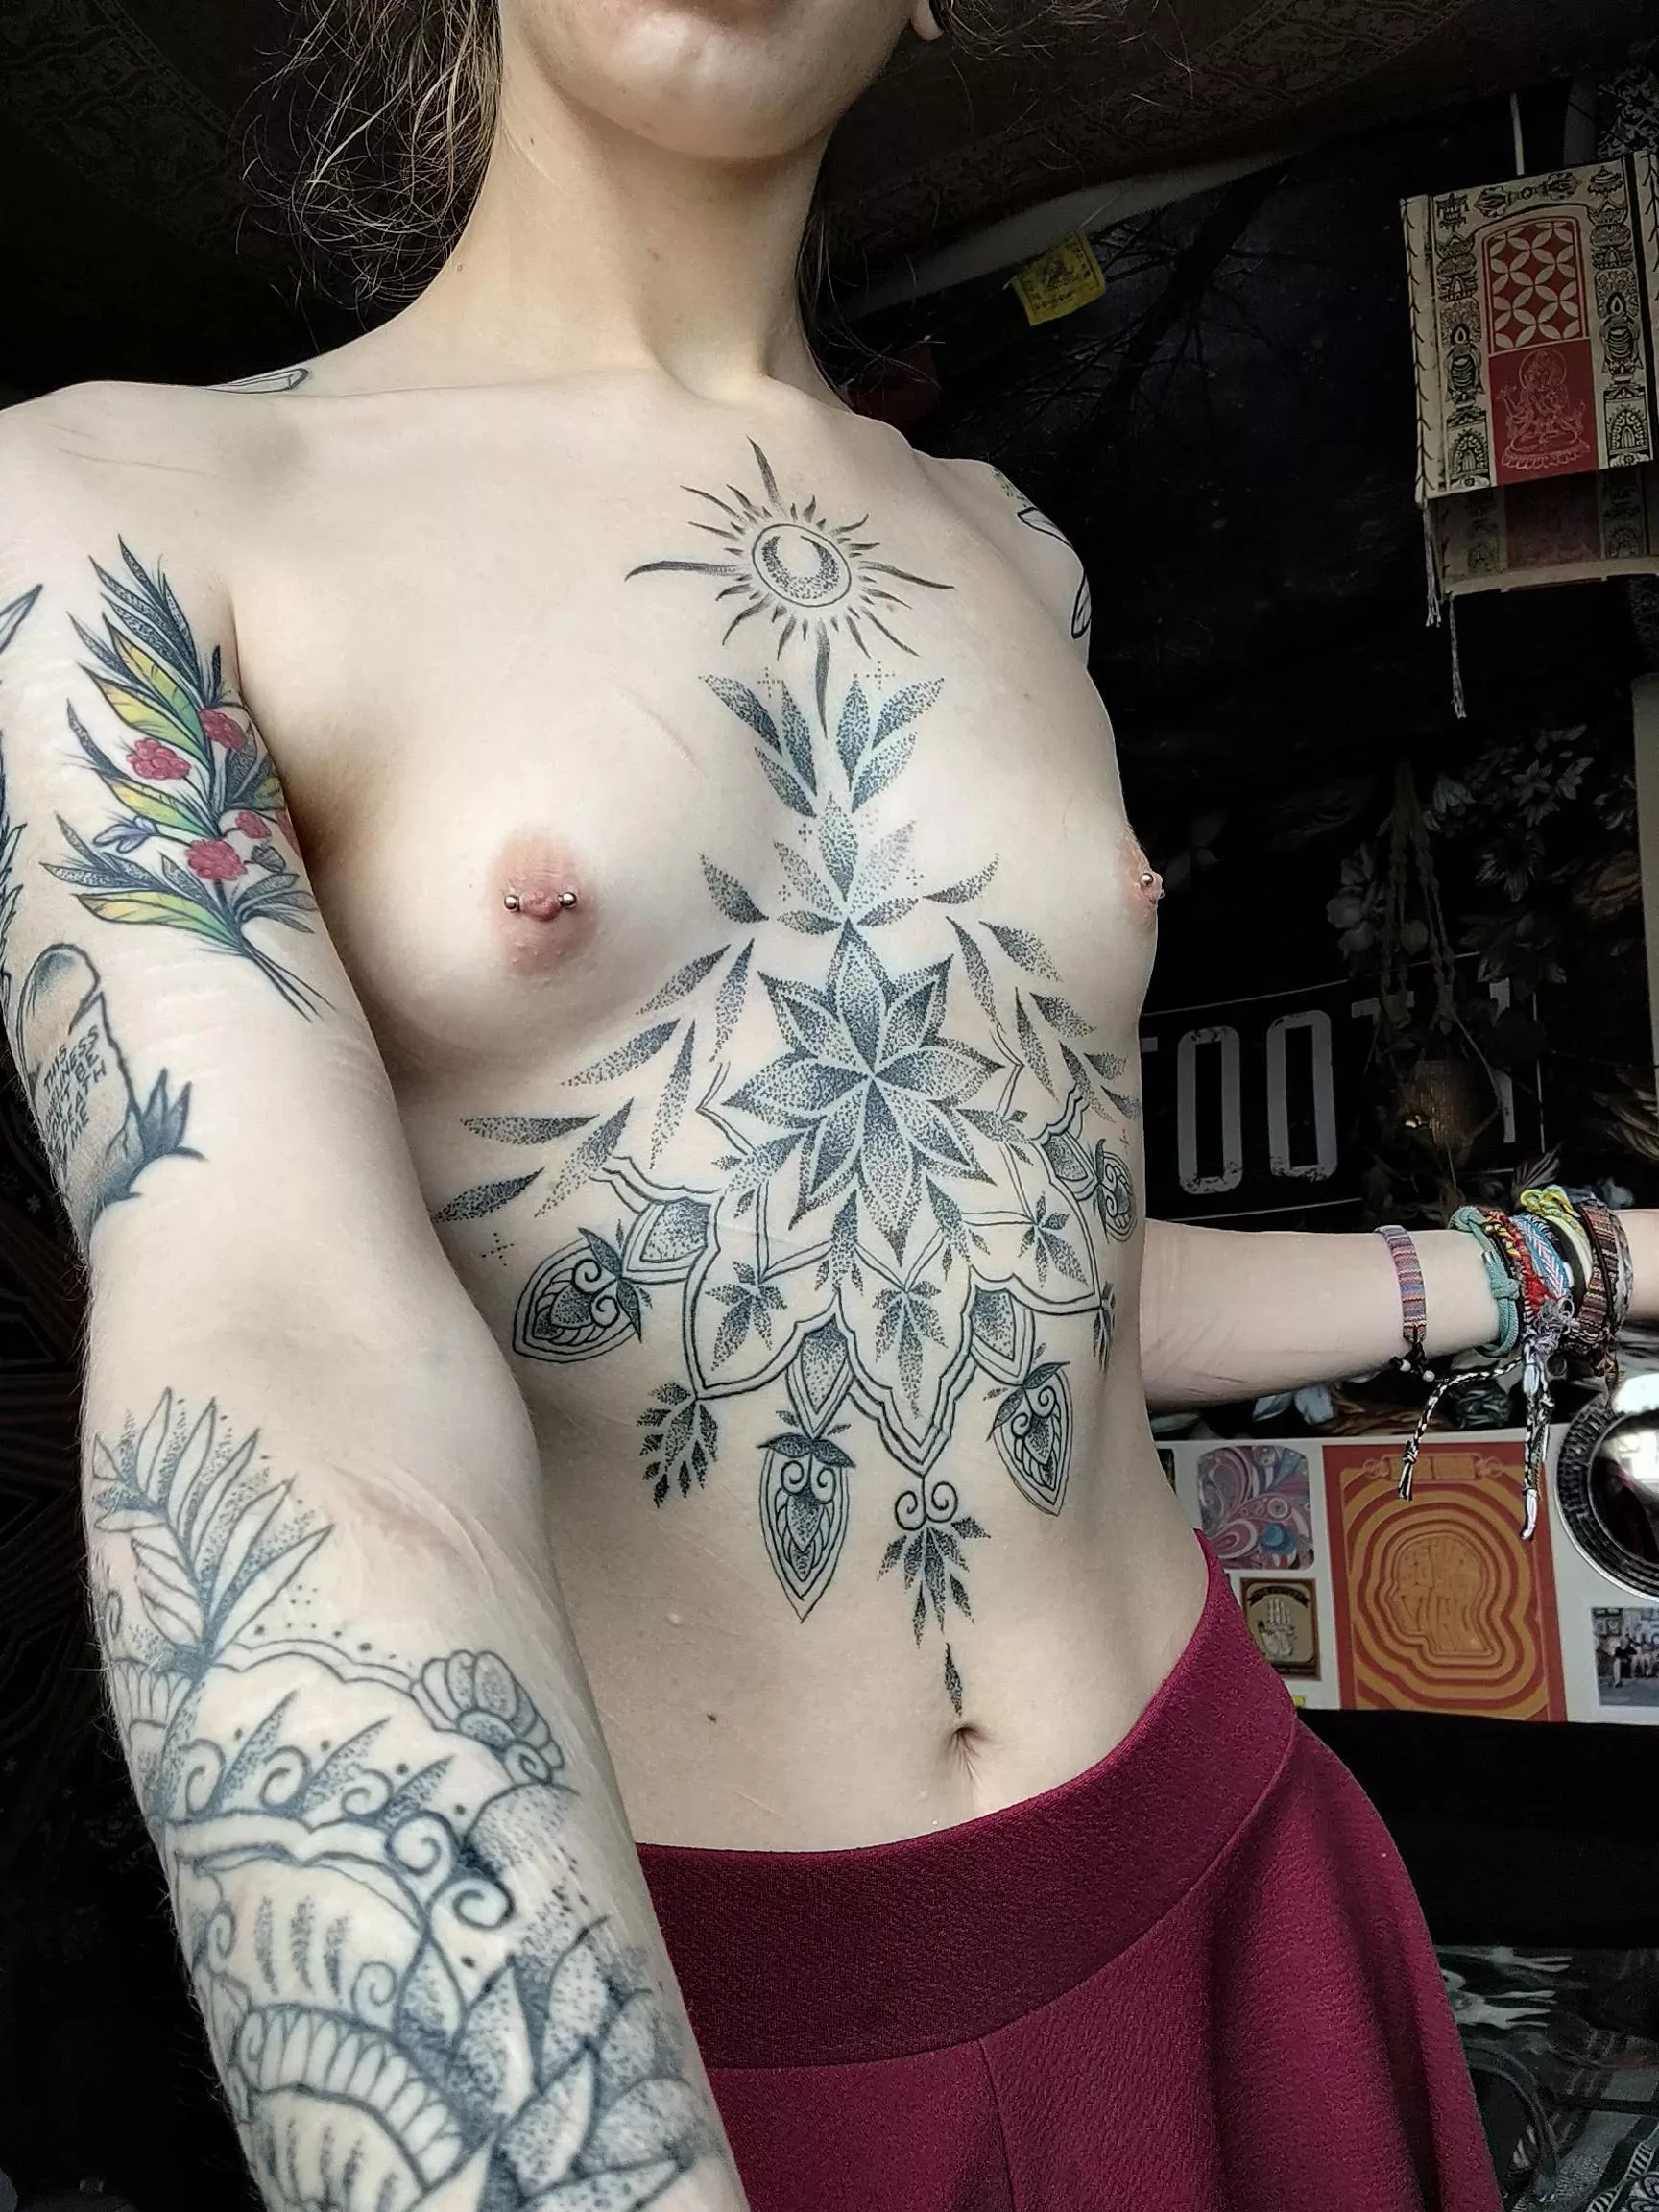 Small Tits Tattoo Porn - My newest tattoo frames my small tits so nicely nudes by liltiddyhippie